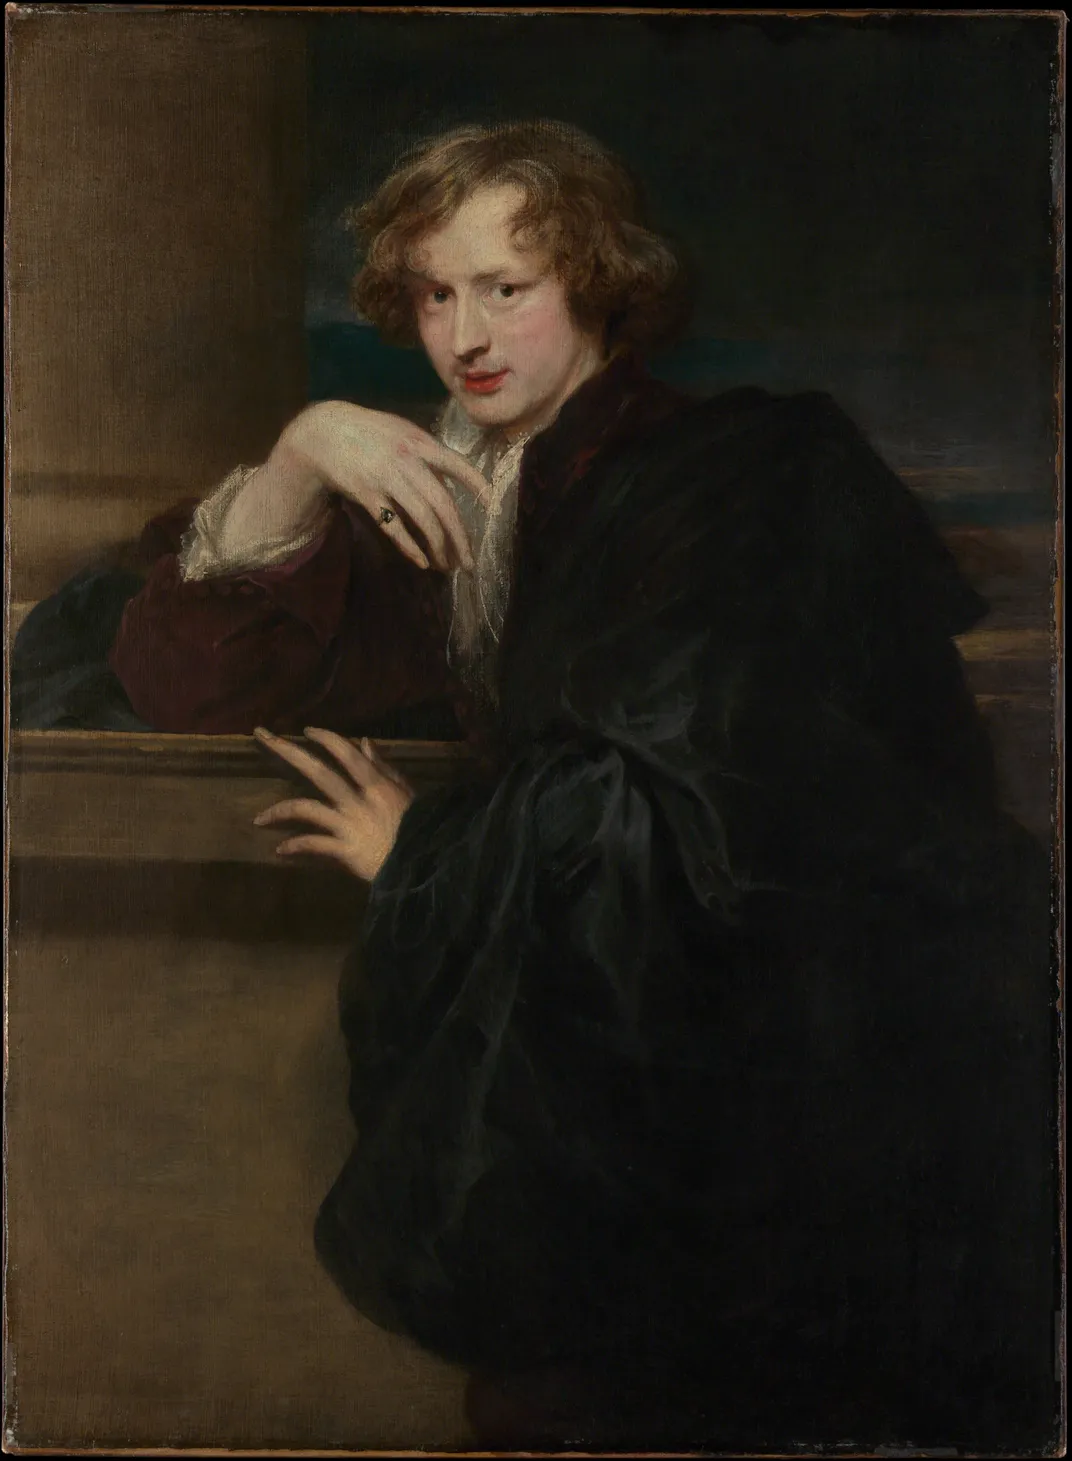 A self portrait of a young man with blonde wavy hair, posing in dark clothes with his hands positioned in front and under his chin